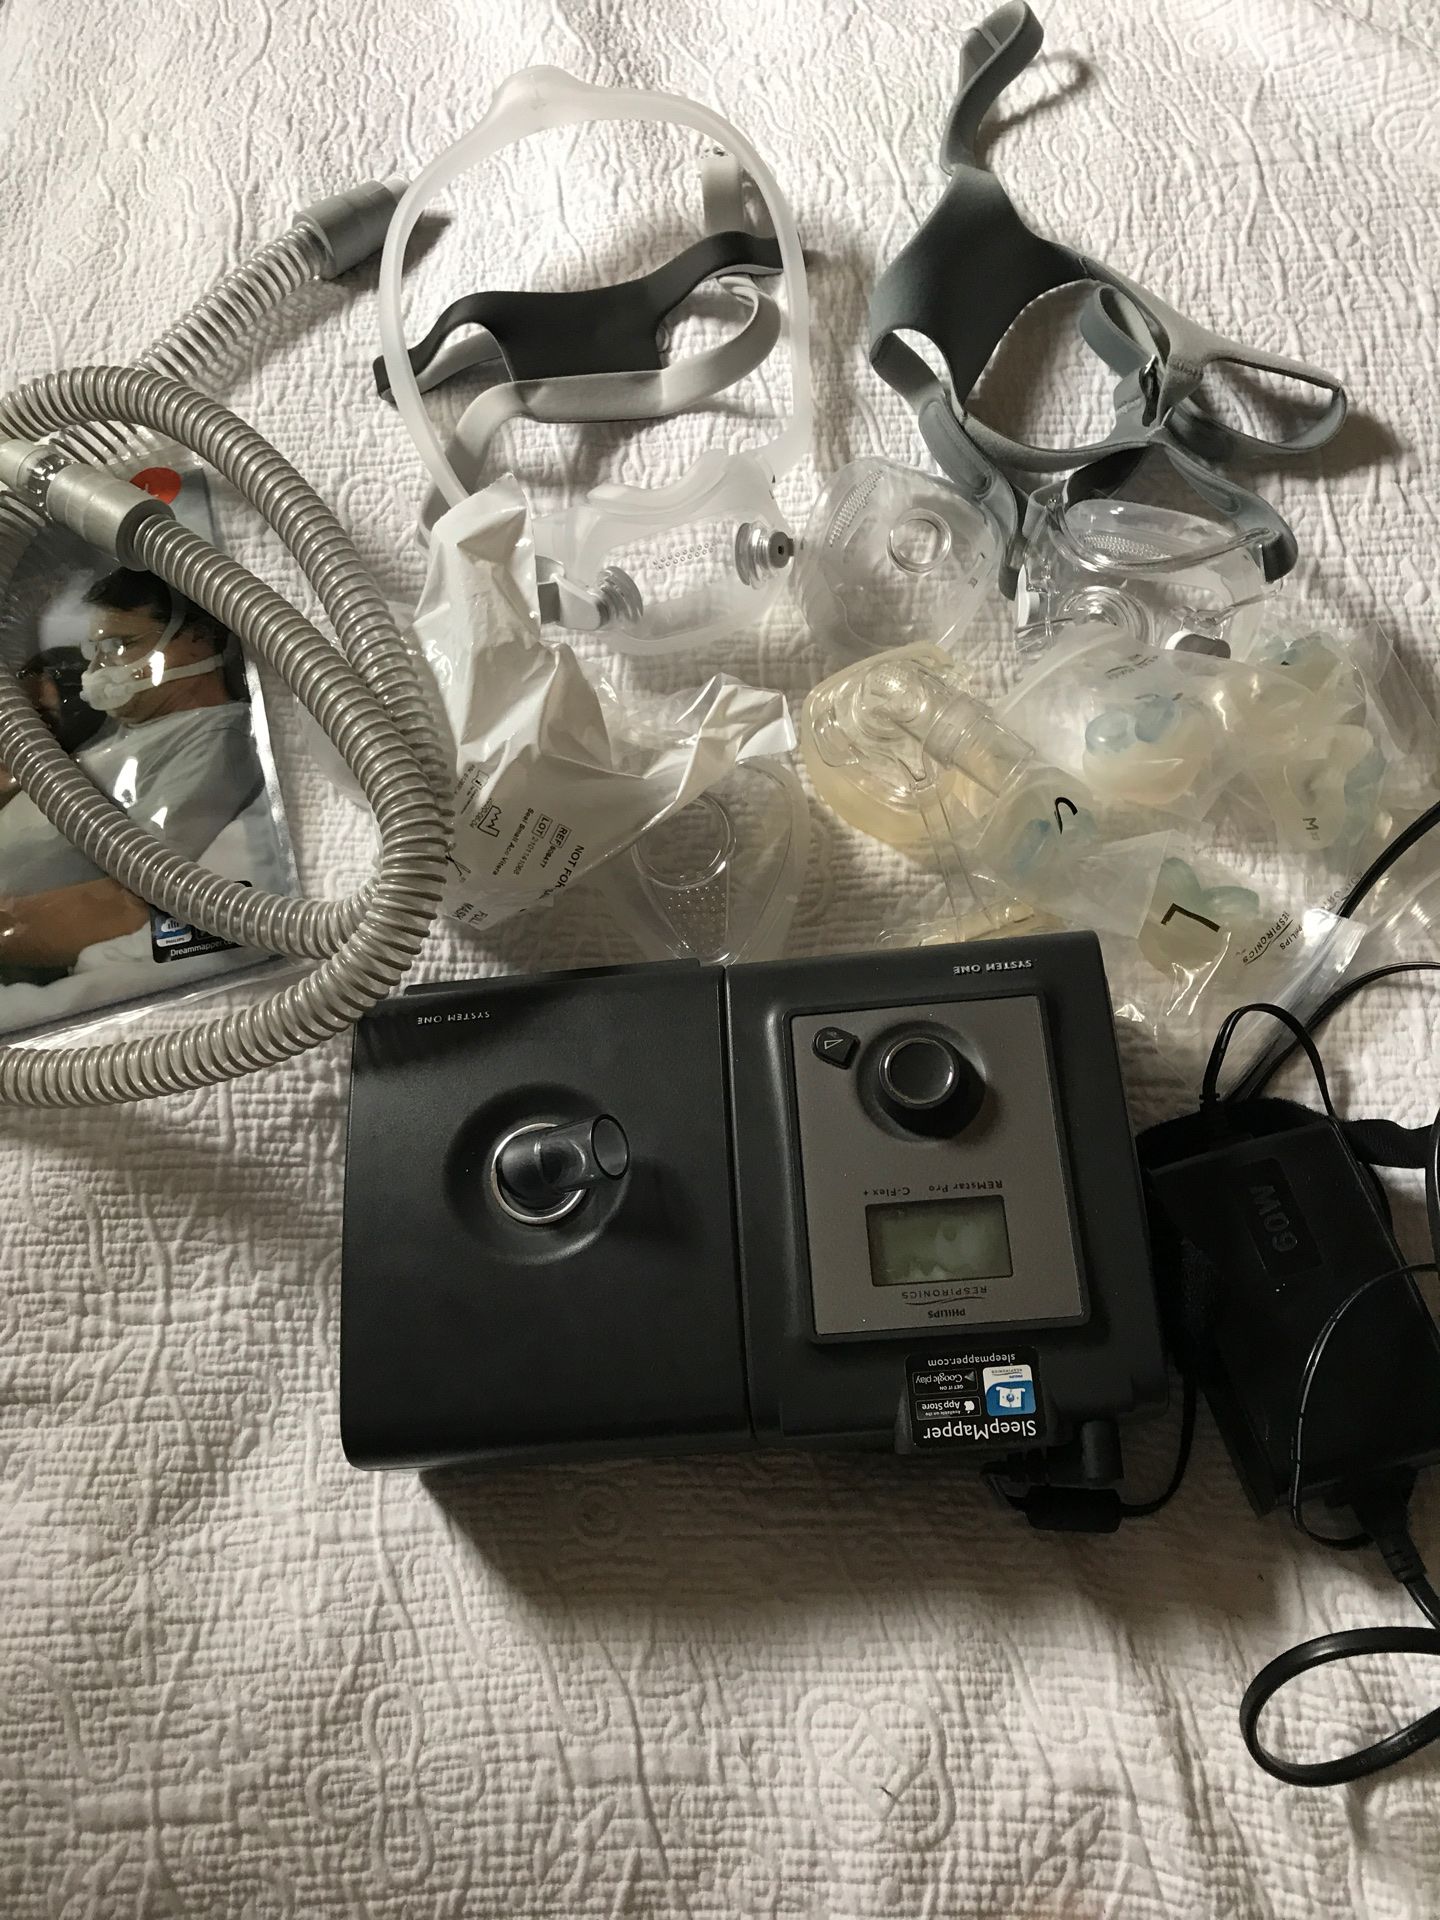 Philips Respironics CPAP machine with hose and two new face masks complete with headgear. Also have nasal cushions type .